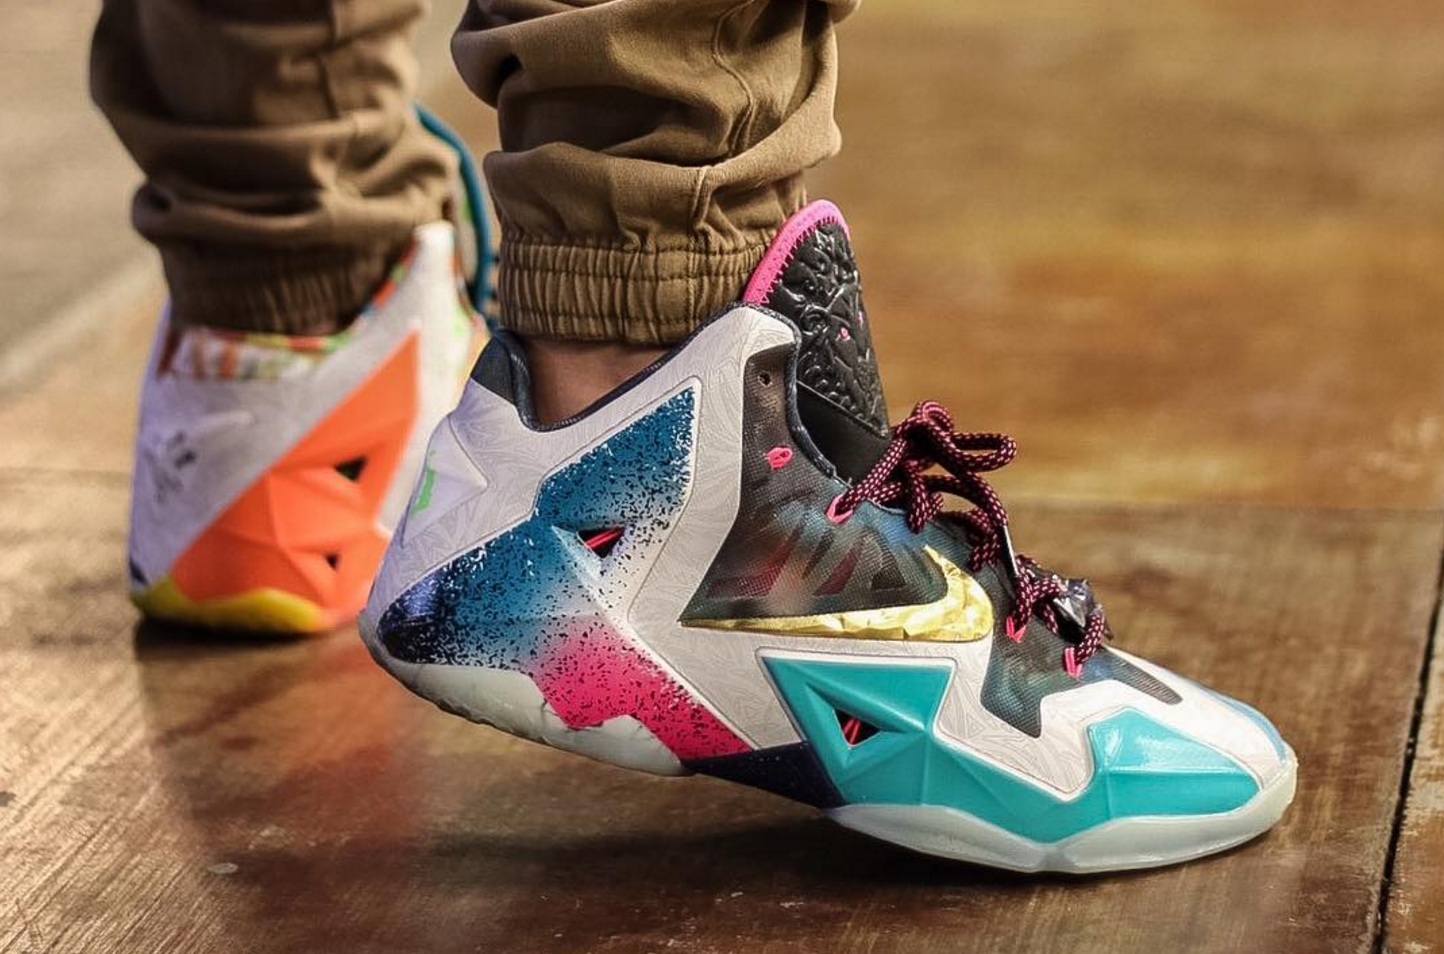 Nike LeBron 11 &quot;What the LeBron&quot;